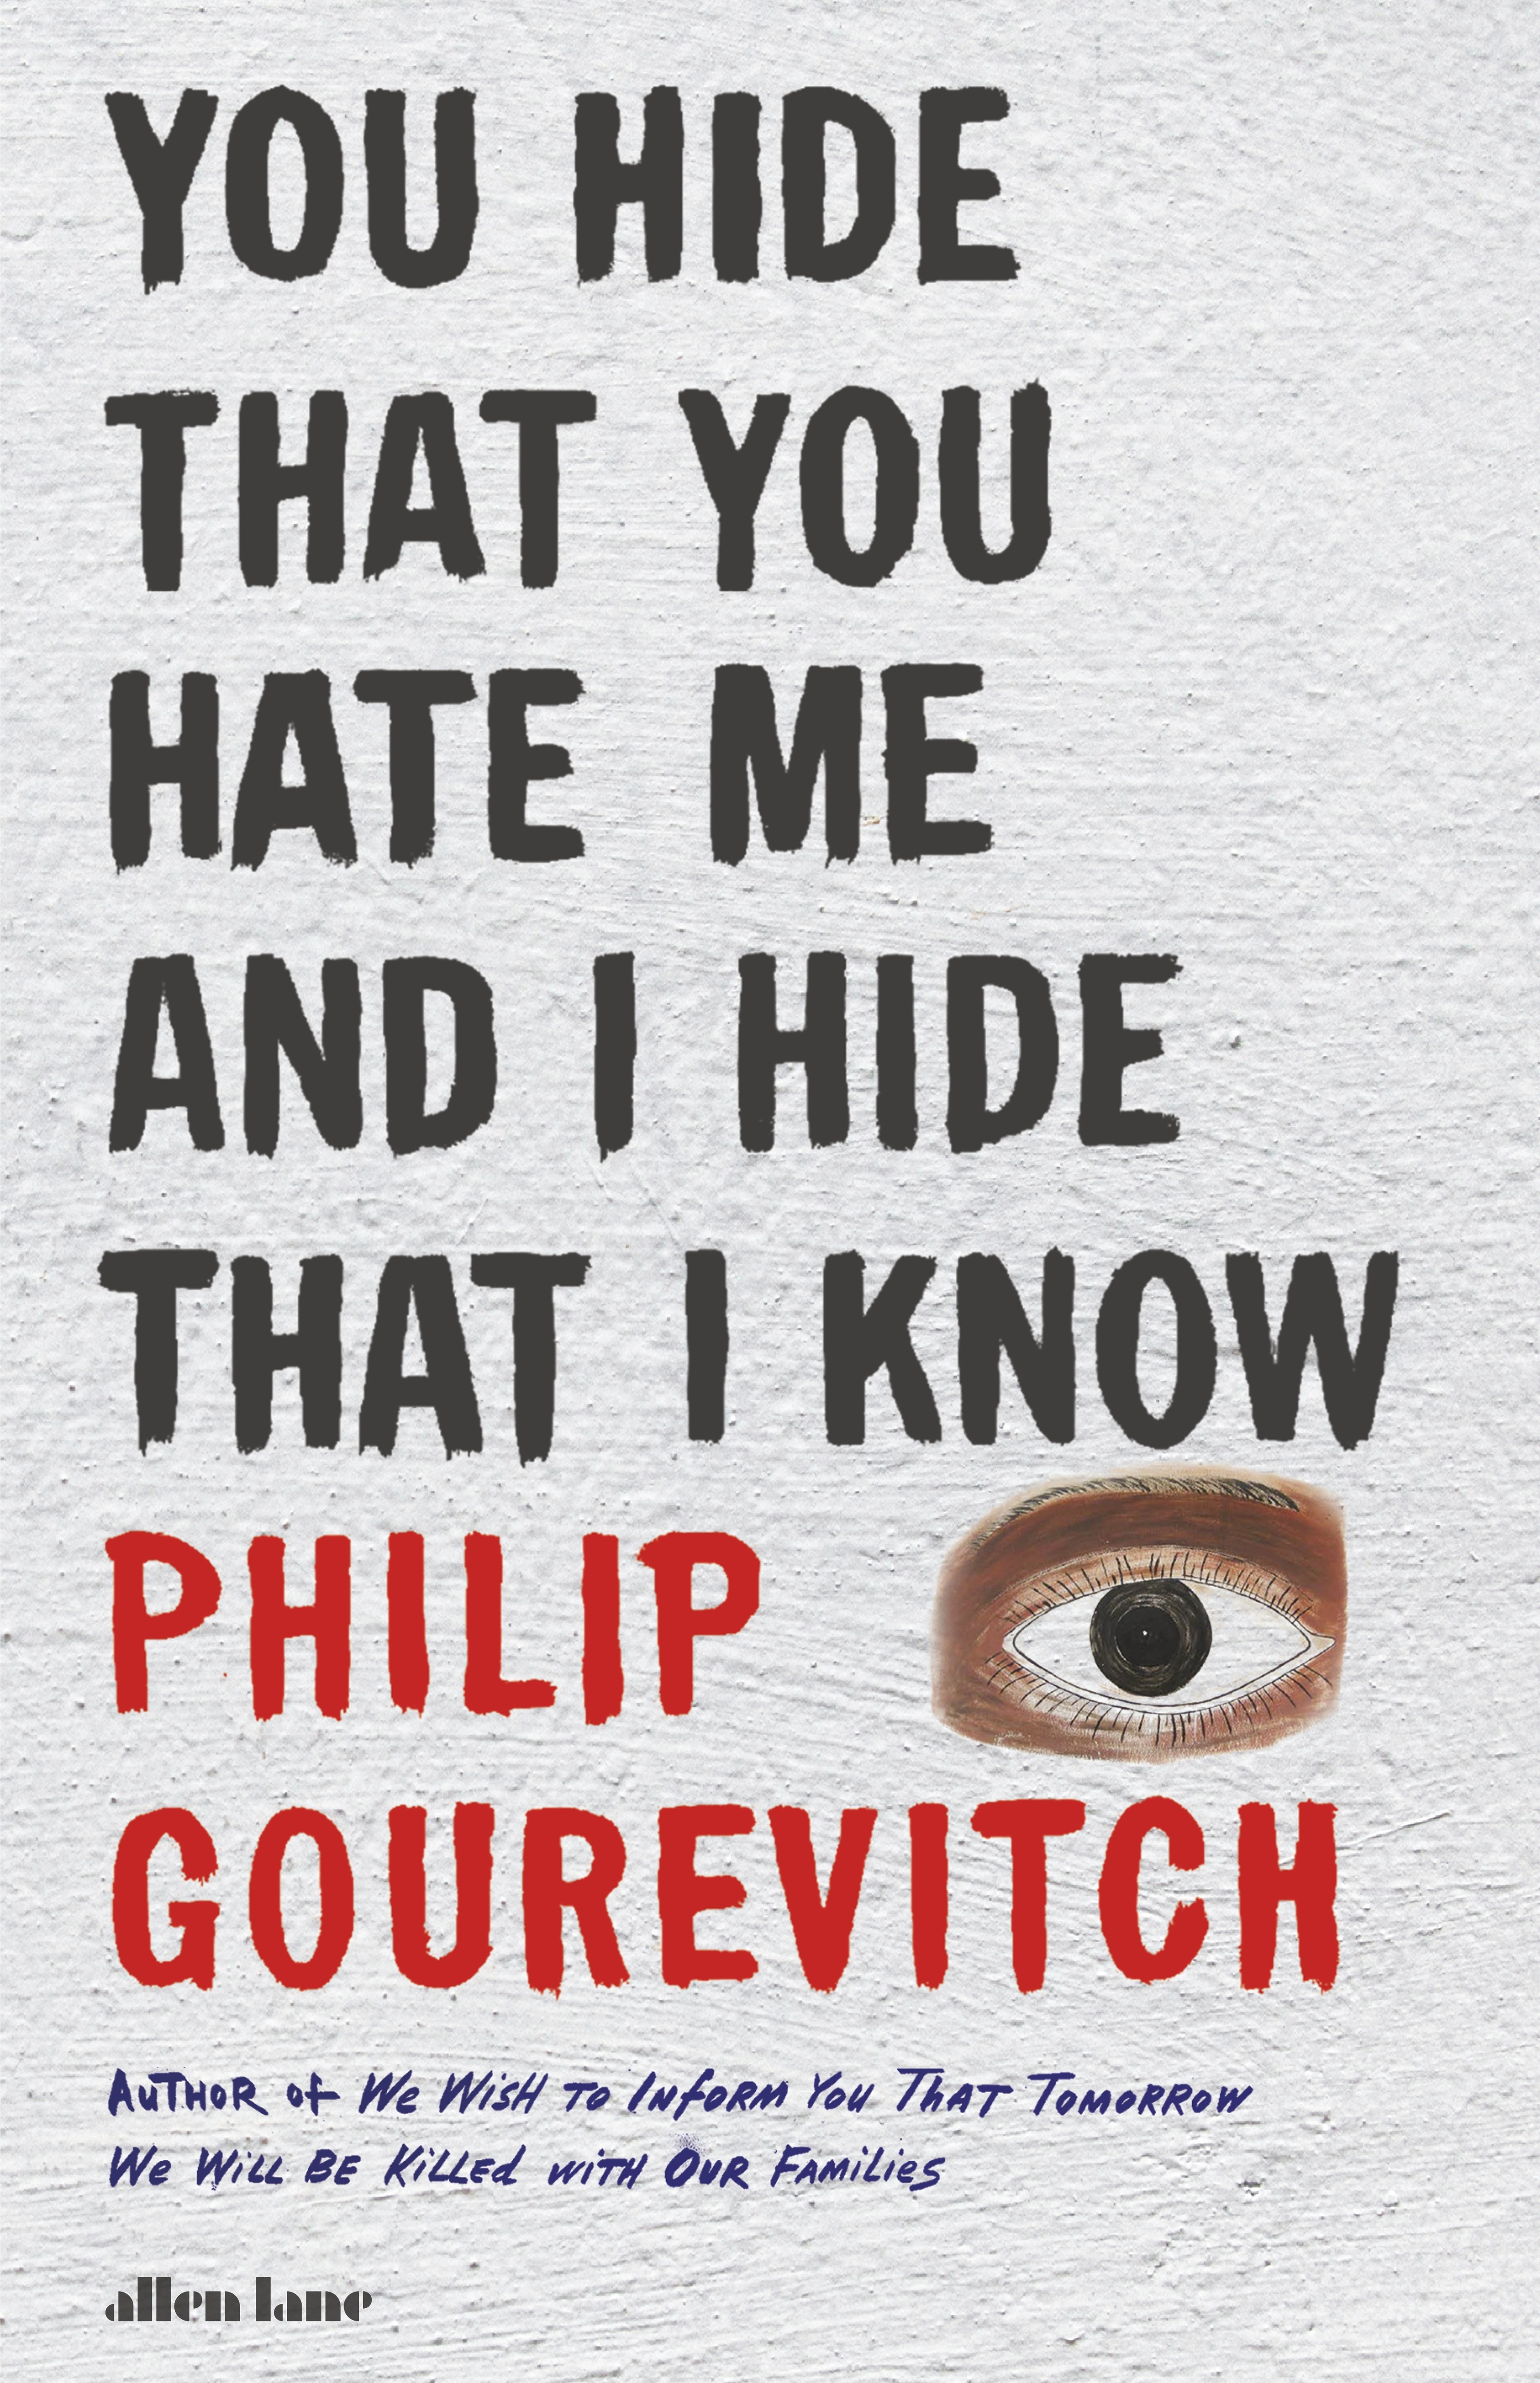 Book “You Hide That You Hate Me and I Hide That I Know” by Philip Gourevitch — September 29, 2022